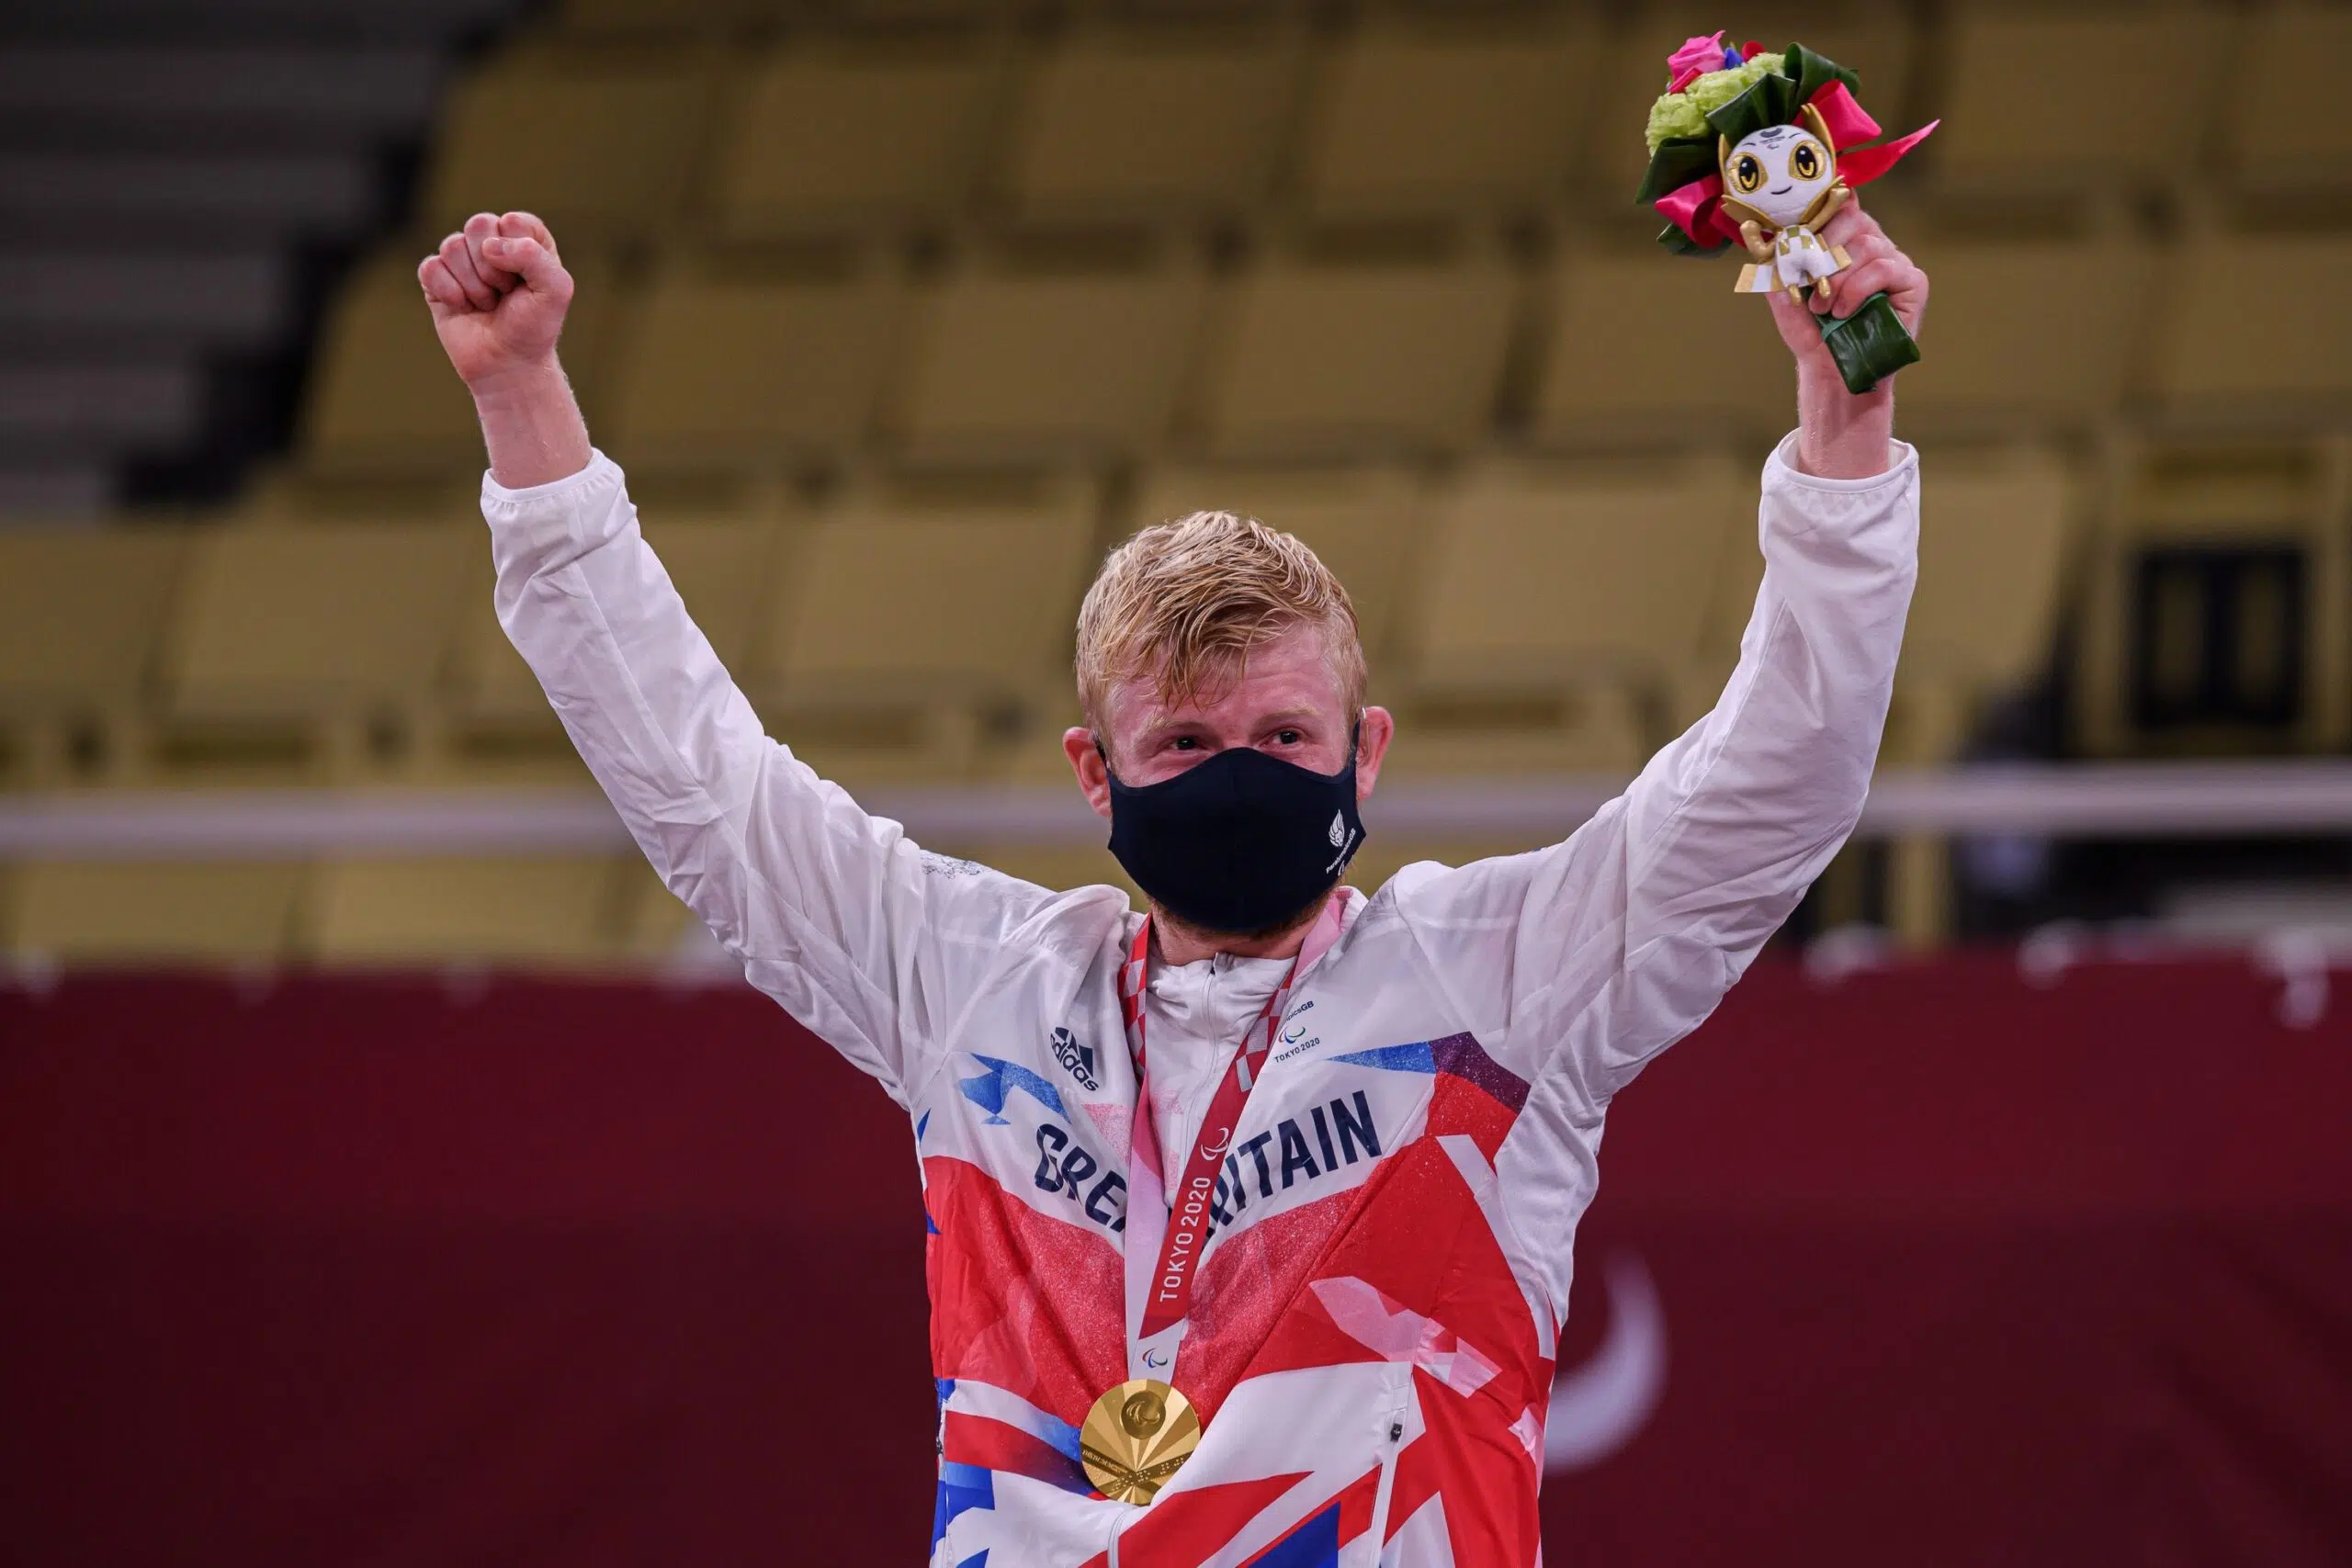 Paralympic champ chris skelley scaled